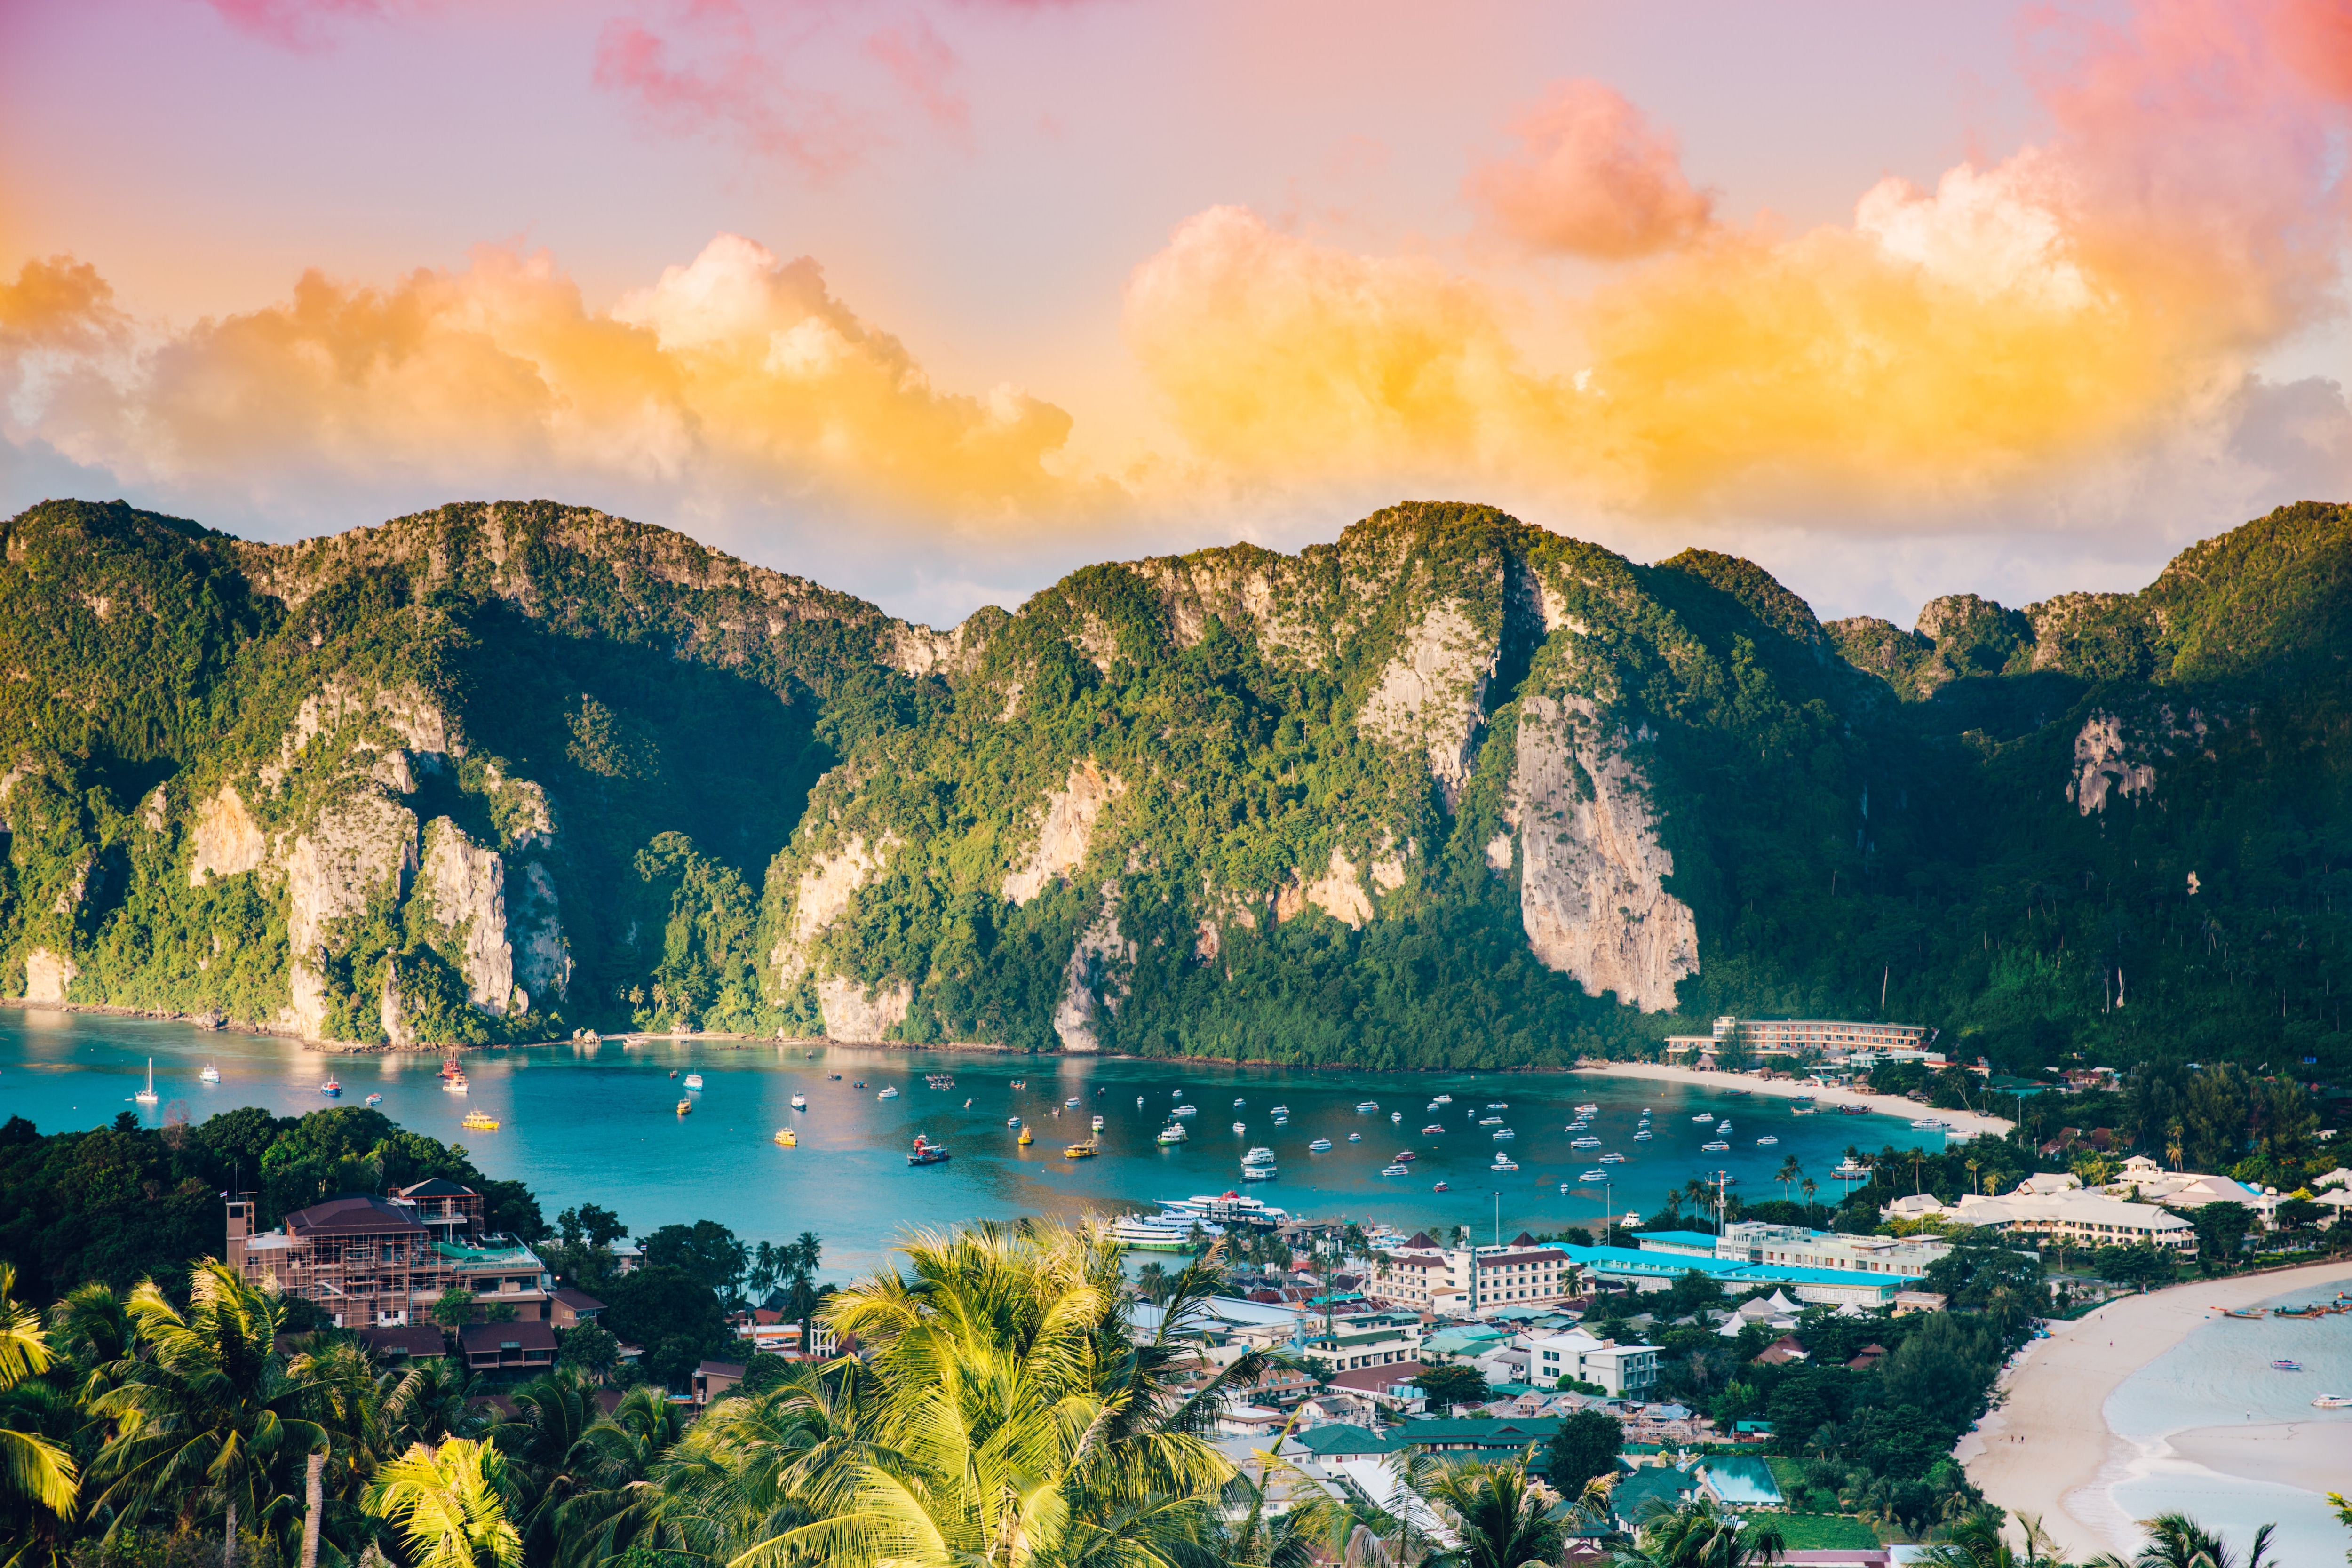 Each destination in Thailand has its own unique charm and activities to offer, whether you're looking for nightlife, beaches, culture or water sports. (Unsplash)